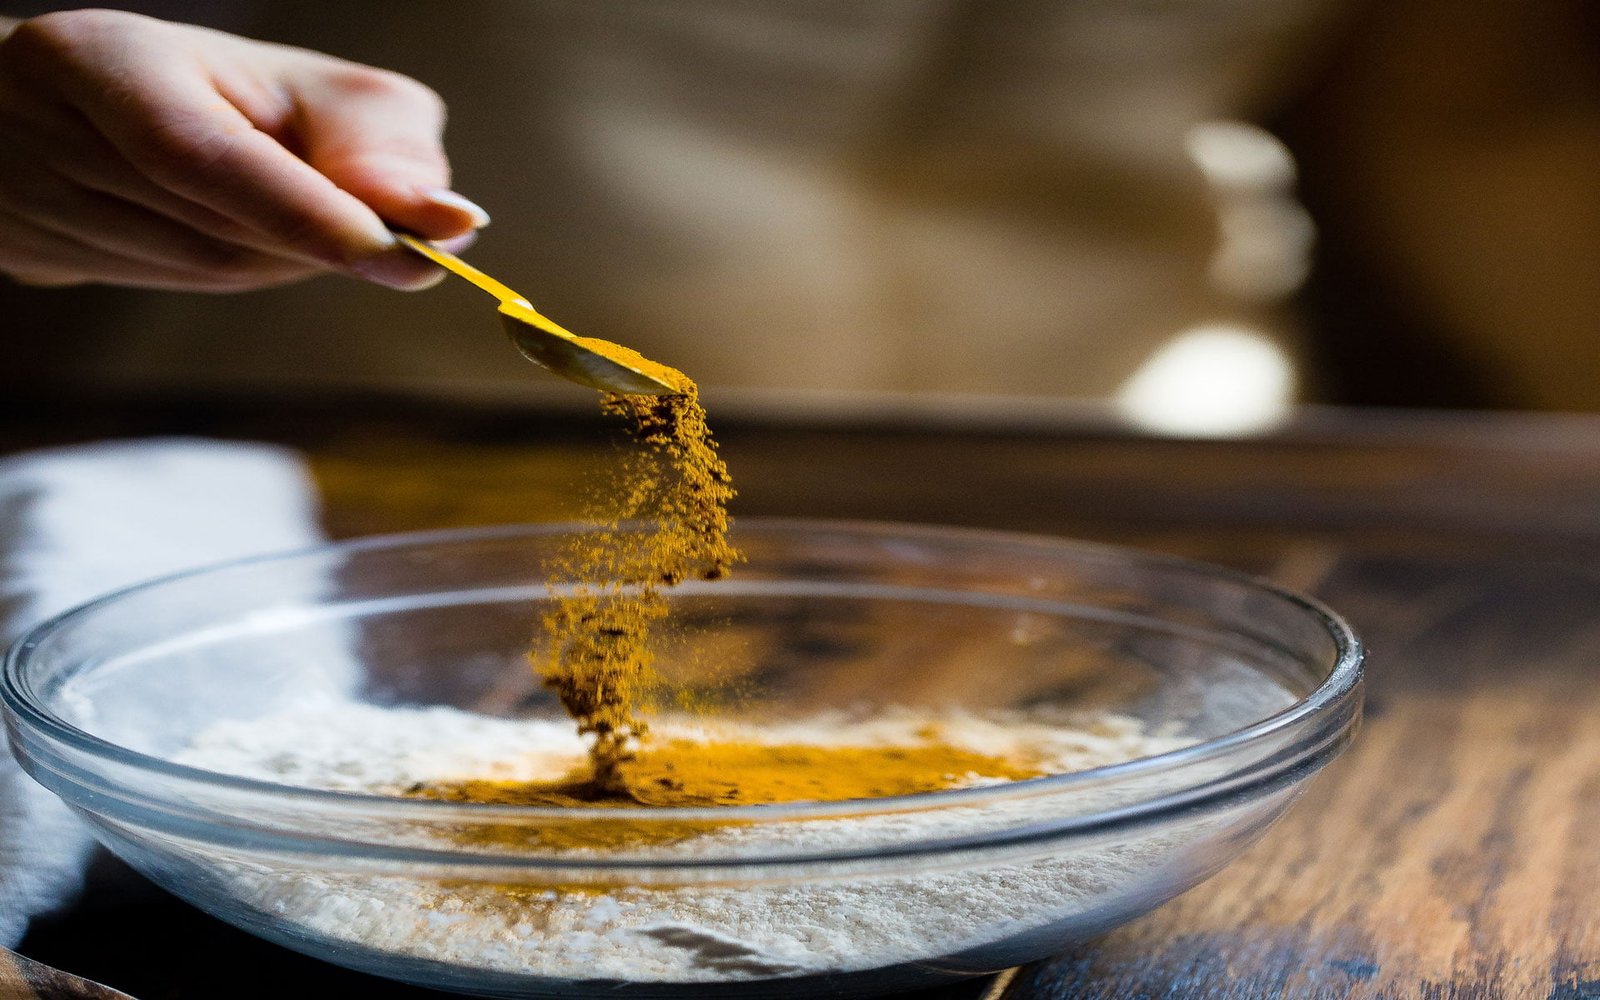 A hand (with spoon) pouring the turmeric in a bowl with some substance in it.